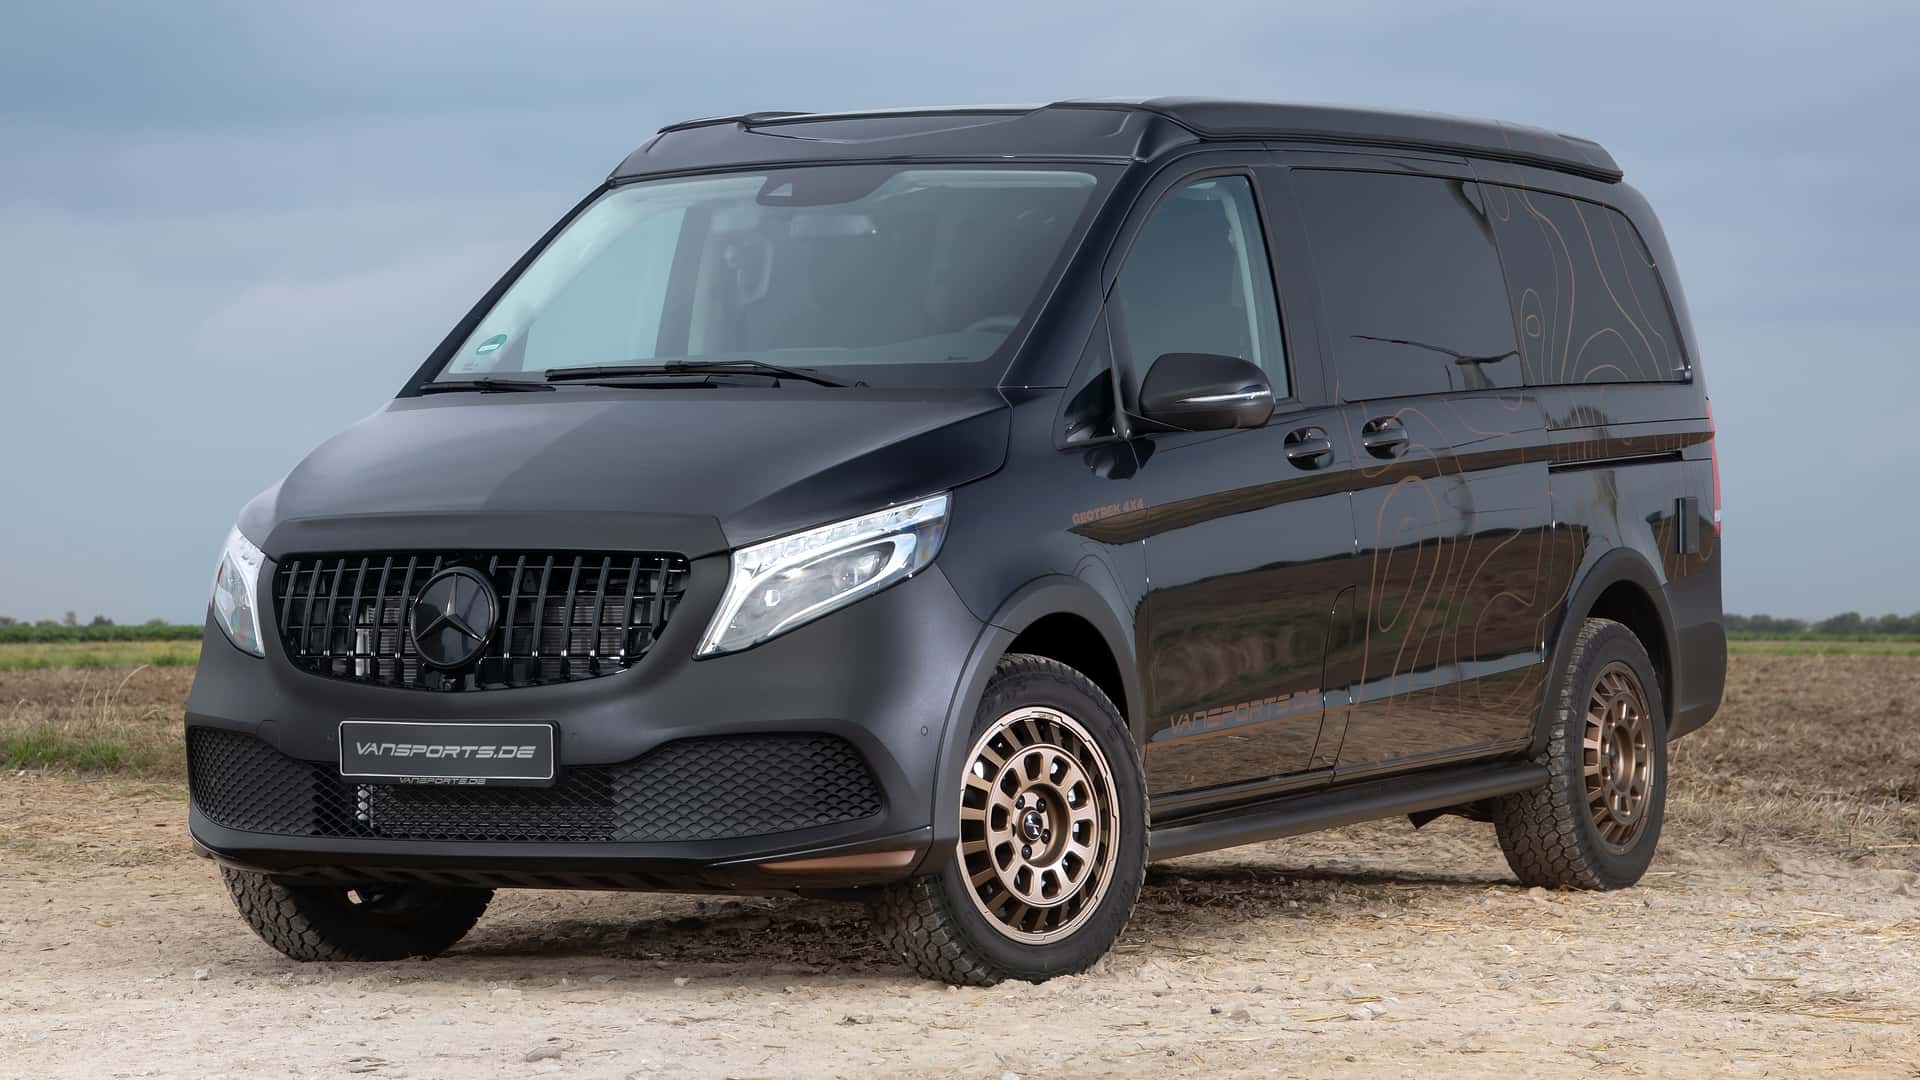 A Look At The All-New Mercedes-Benz V-Class Geotrek By Van Sports